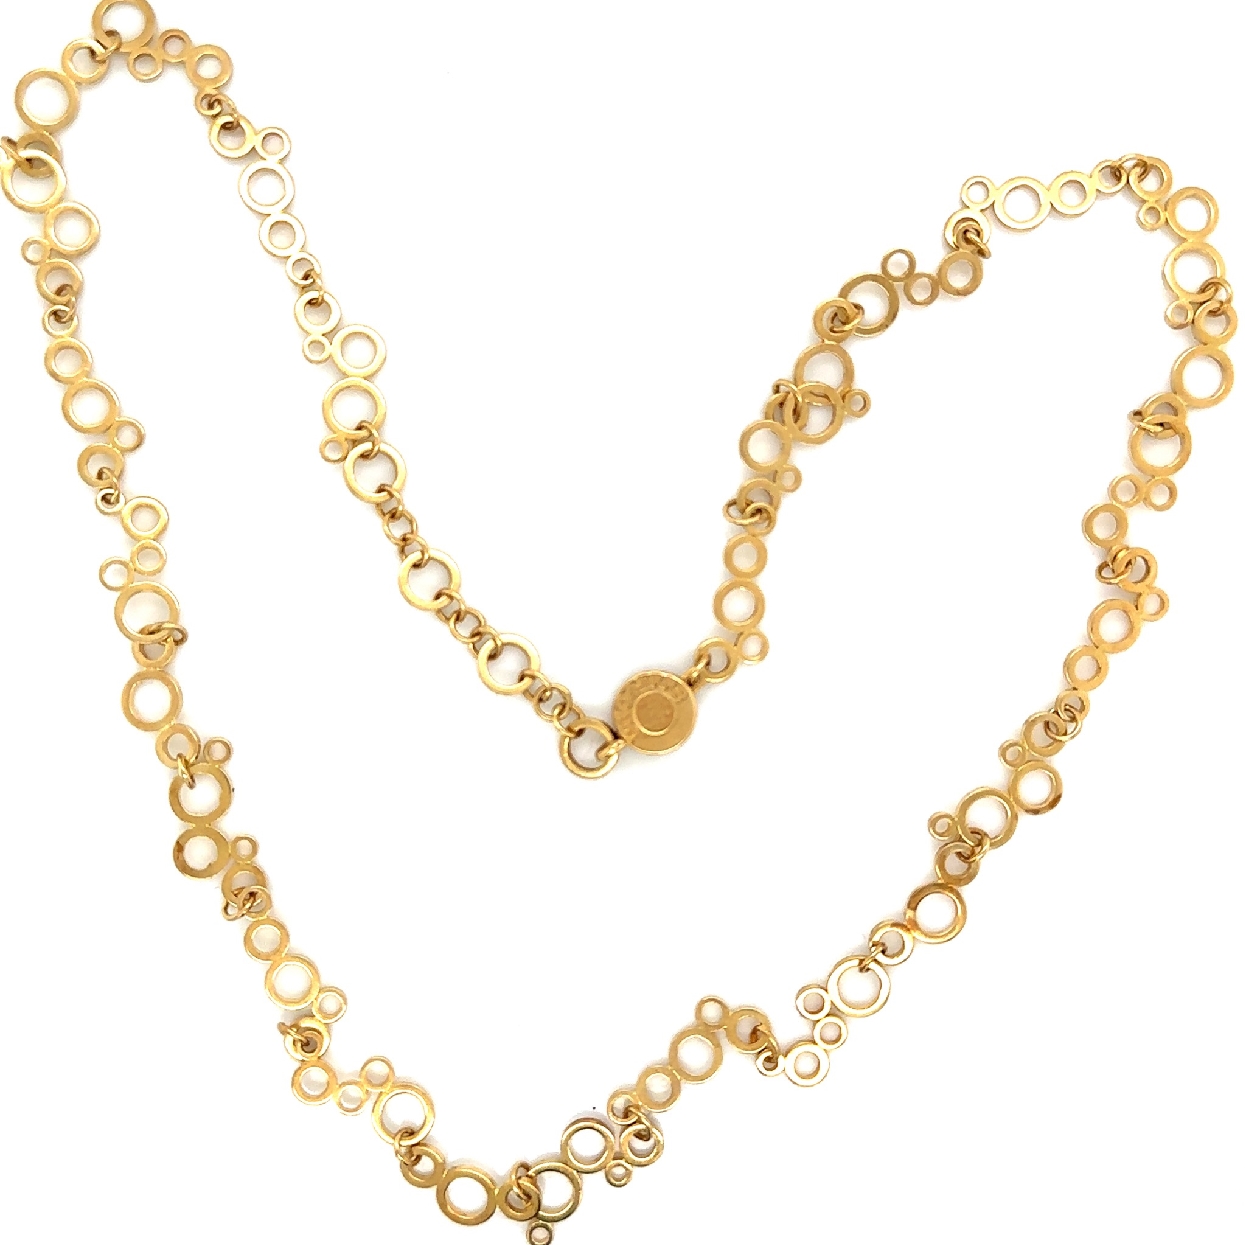 18K Yellow Gold Abstract Circle Chain

18 Inches
Adjustable 